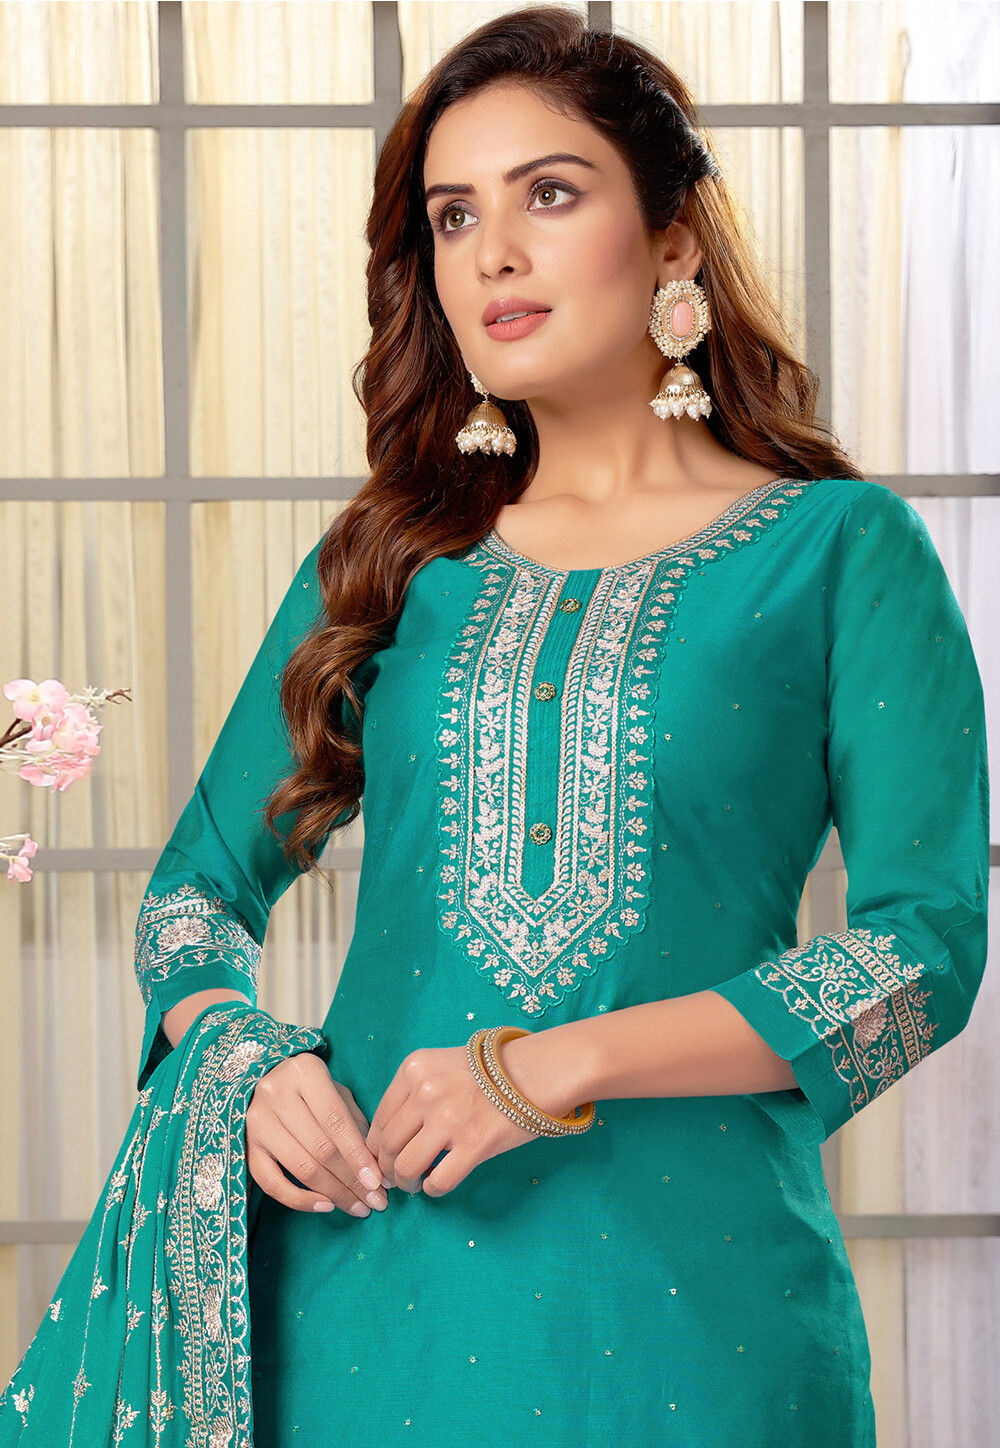 Embroidered Chanderi Silk Pakistani Suit in Teal Green : KGZT4250